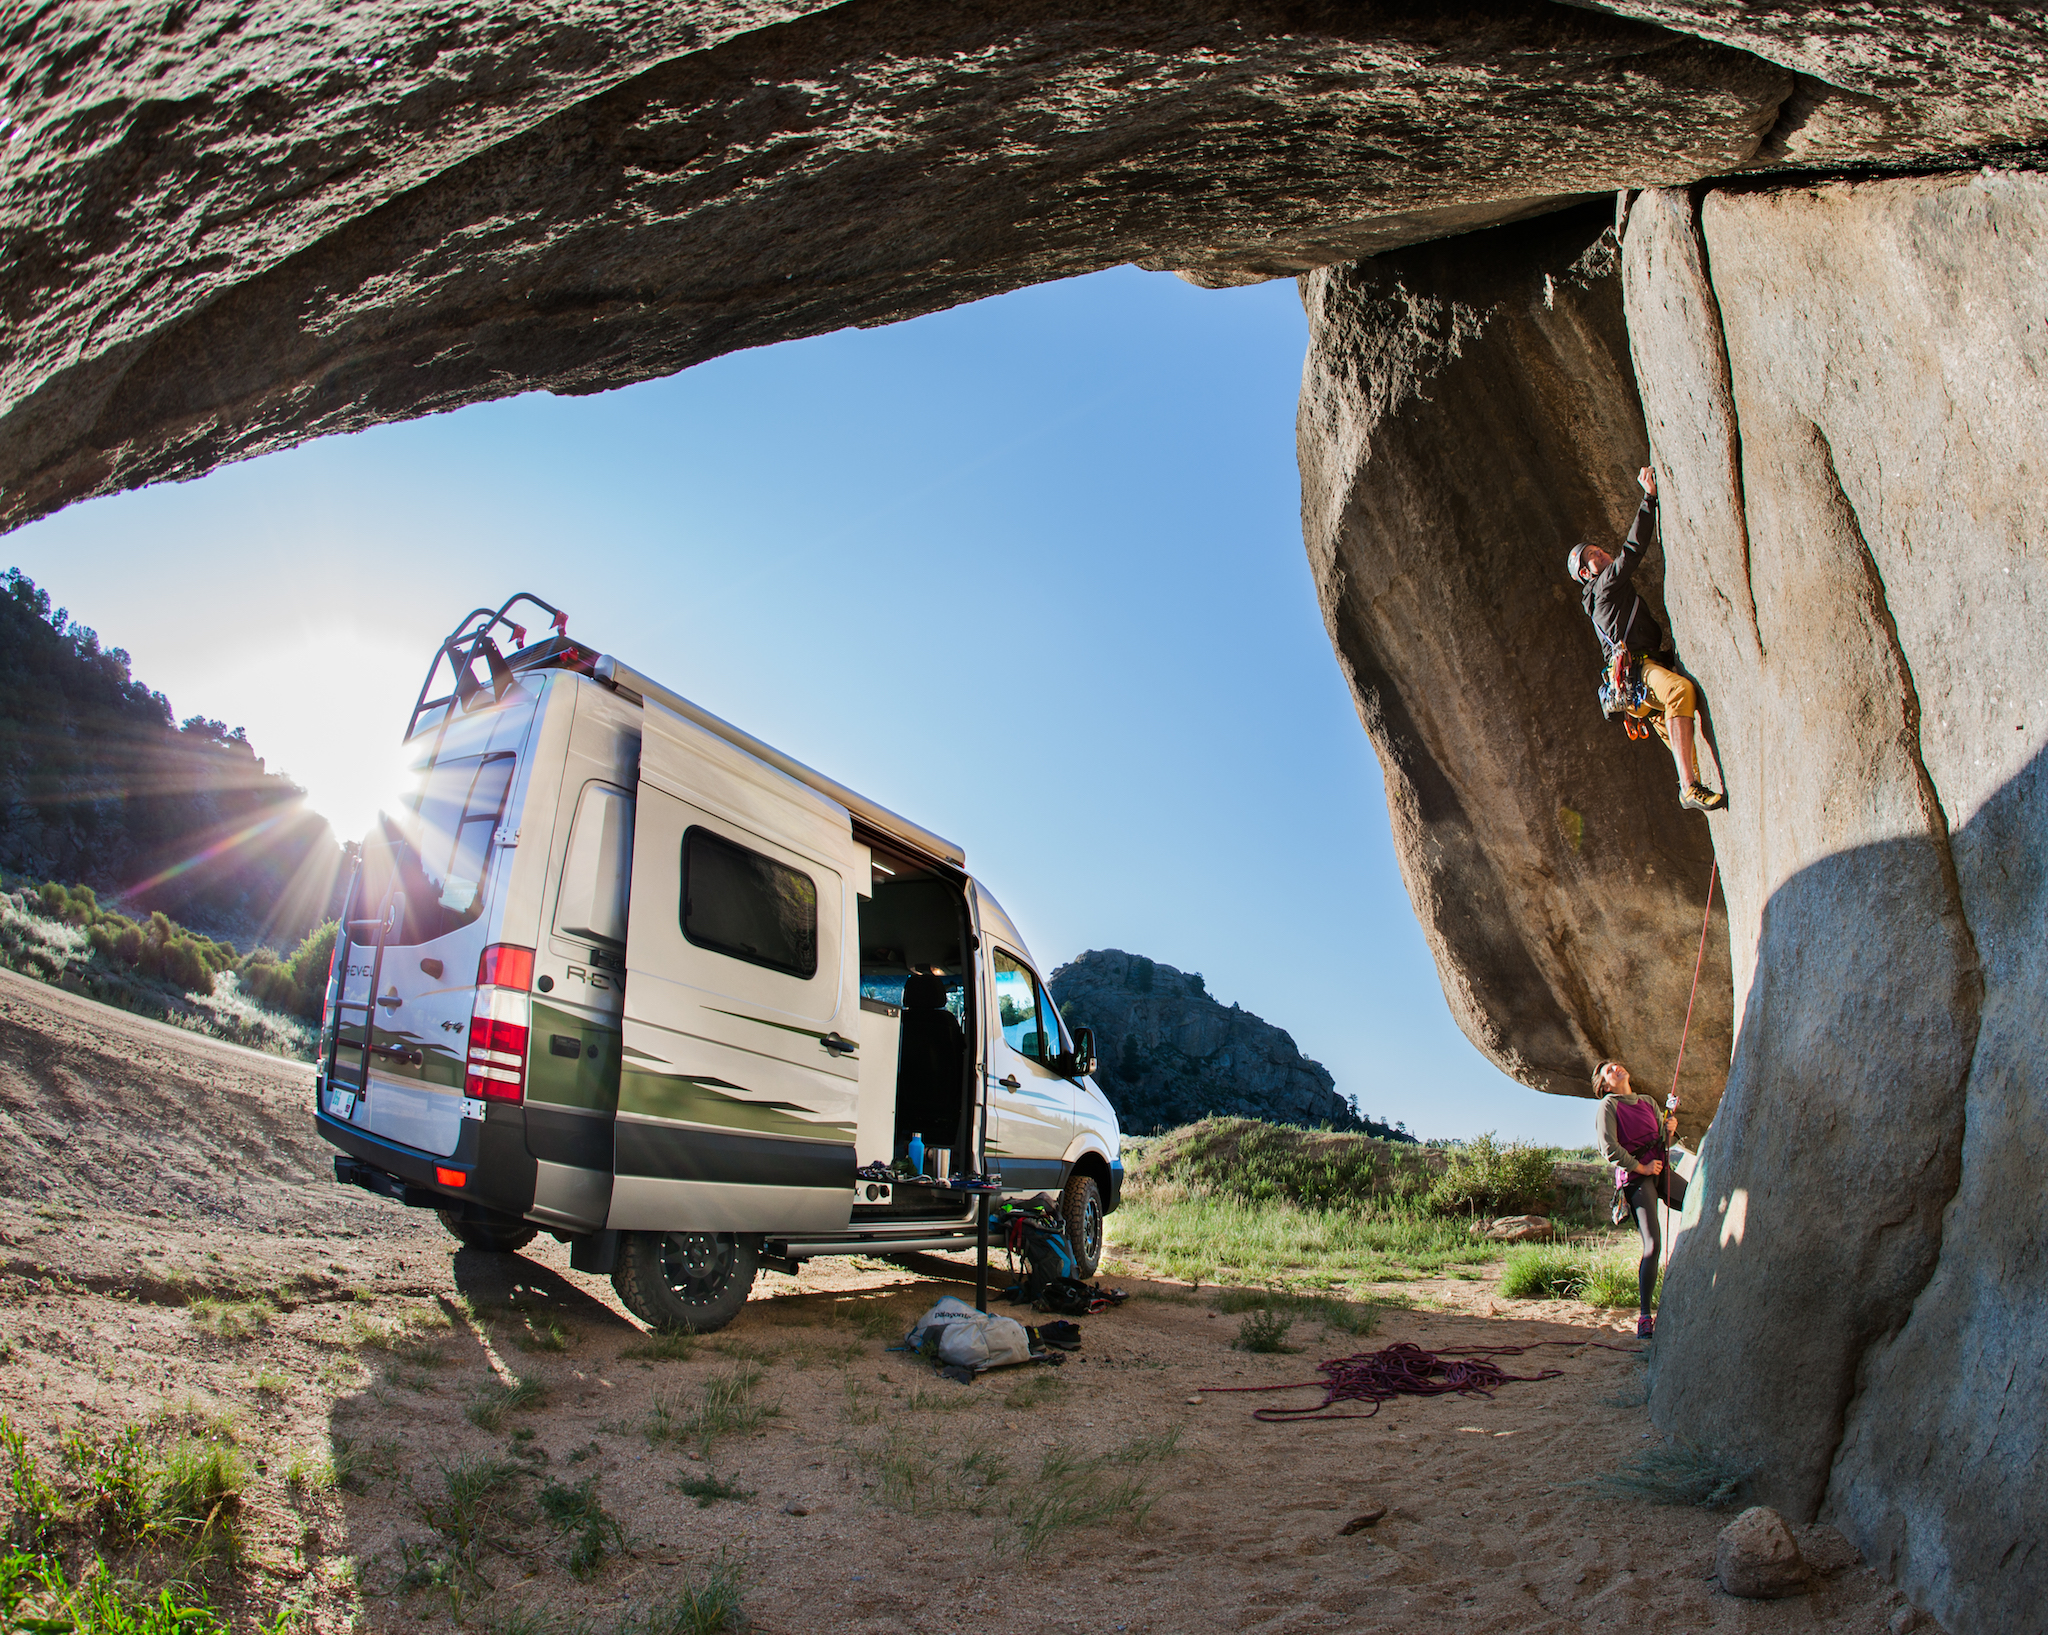 Winnebago Revel pared beneath rock formation with two people climbing the rock structures.